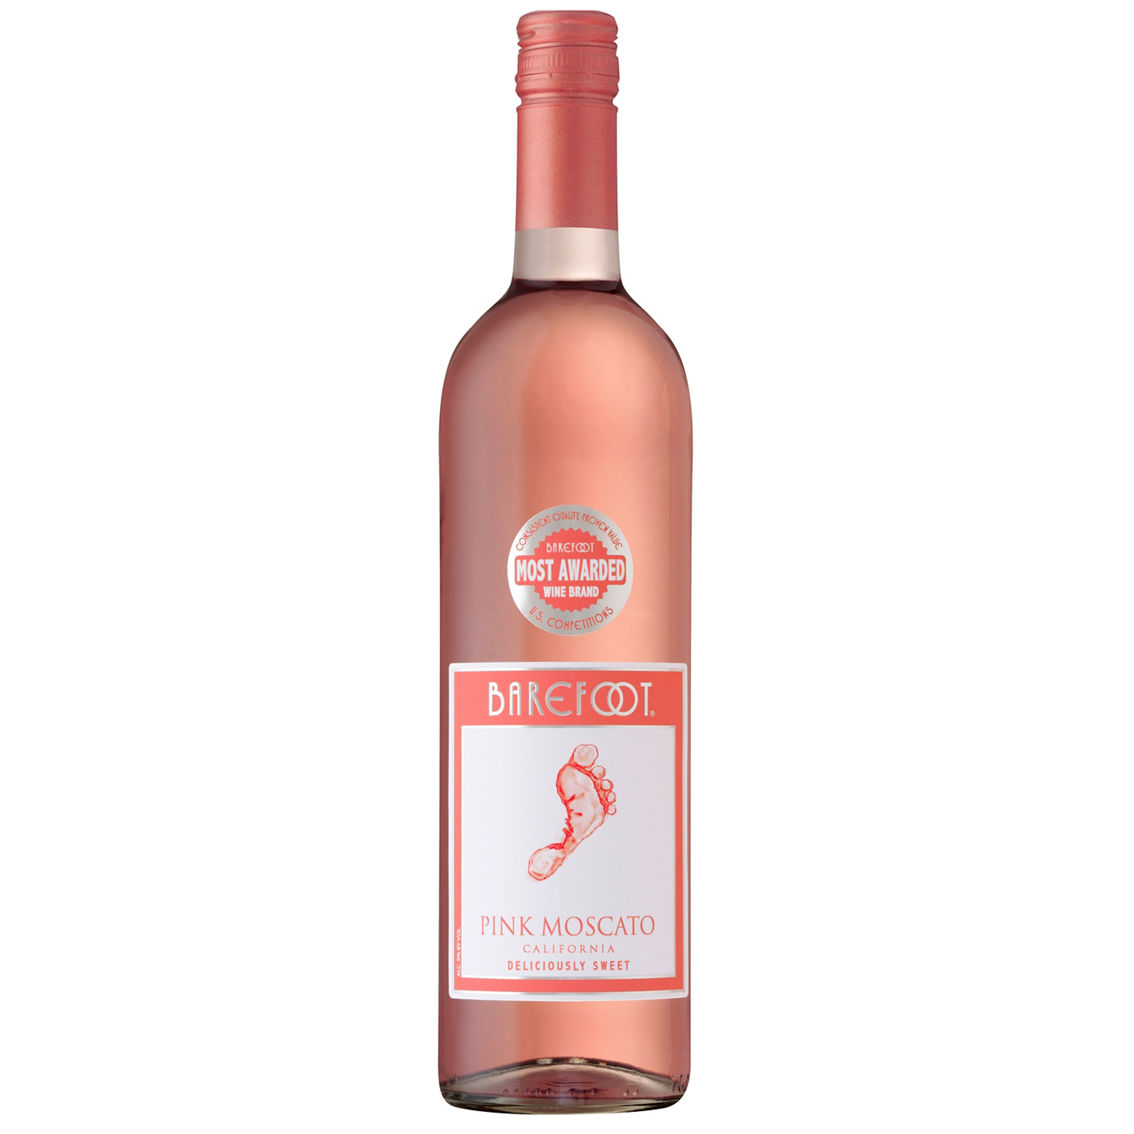 Barefoot Pink Moscato 750ml - Image 1 of 2